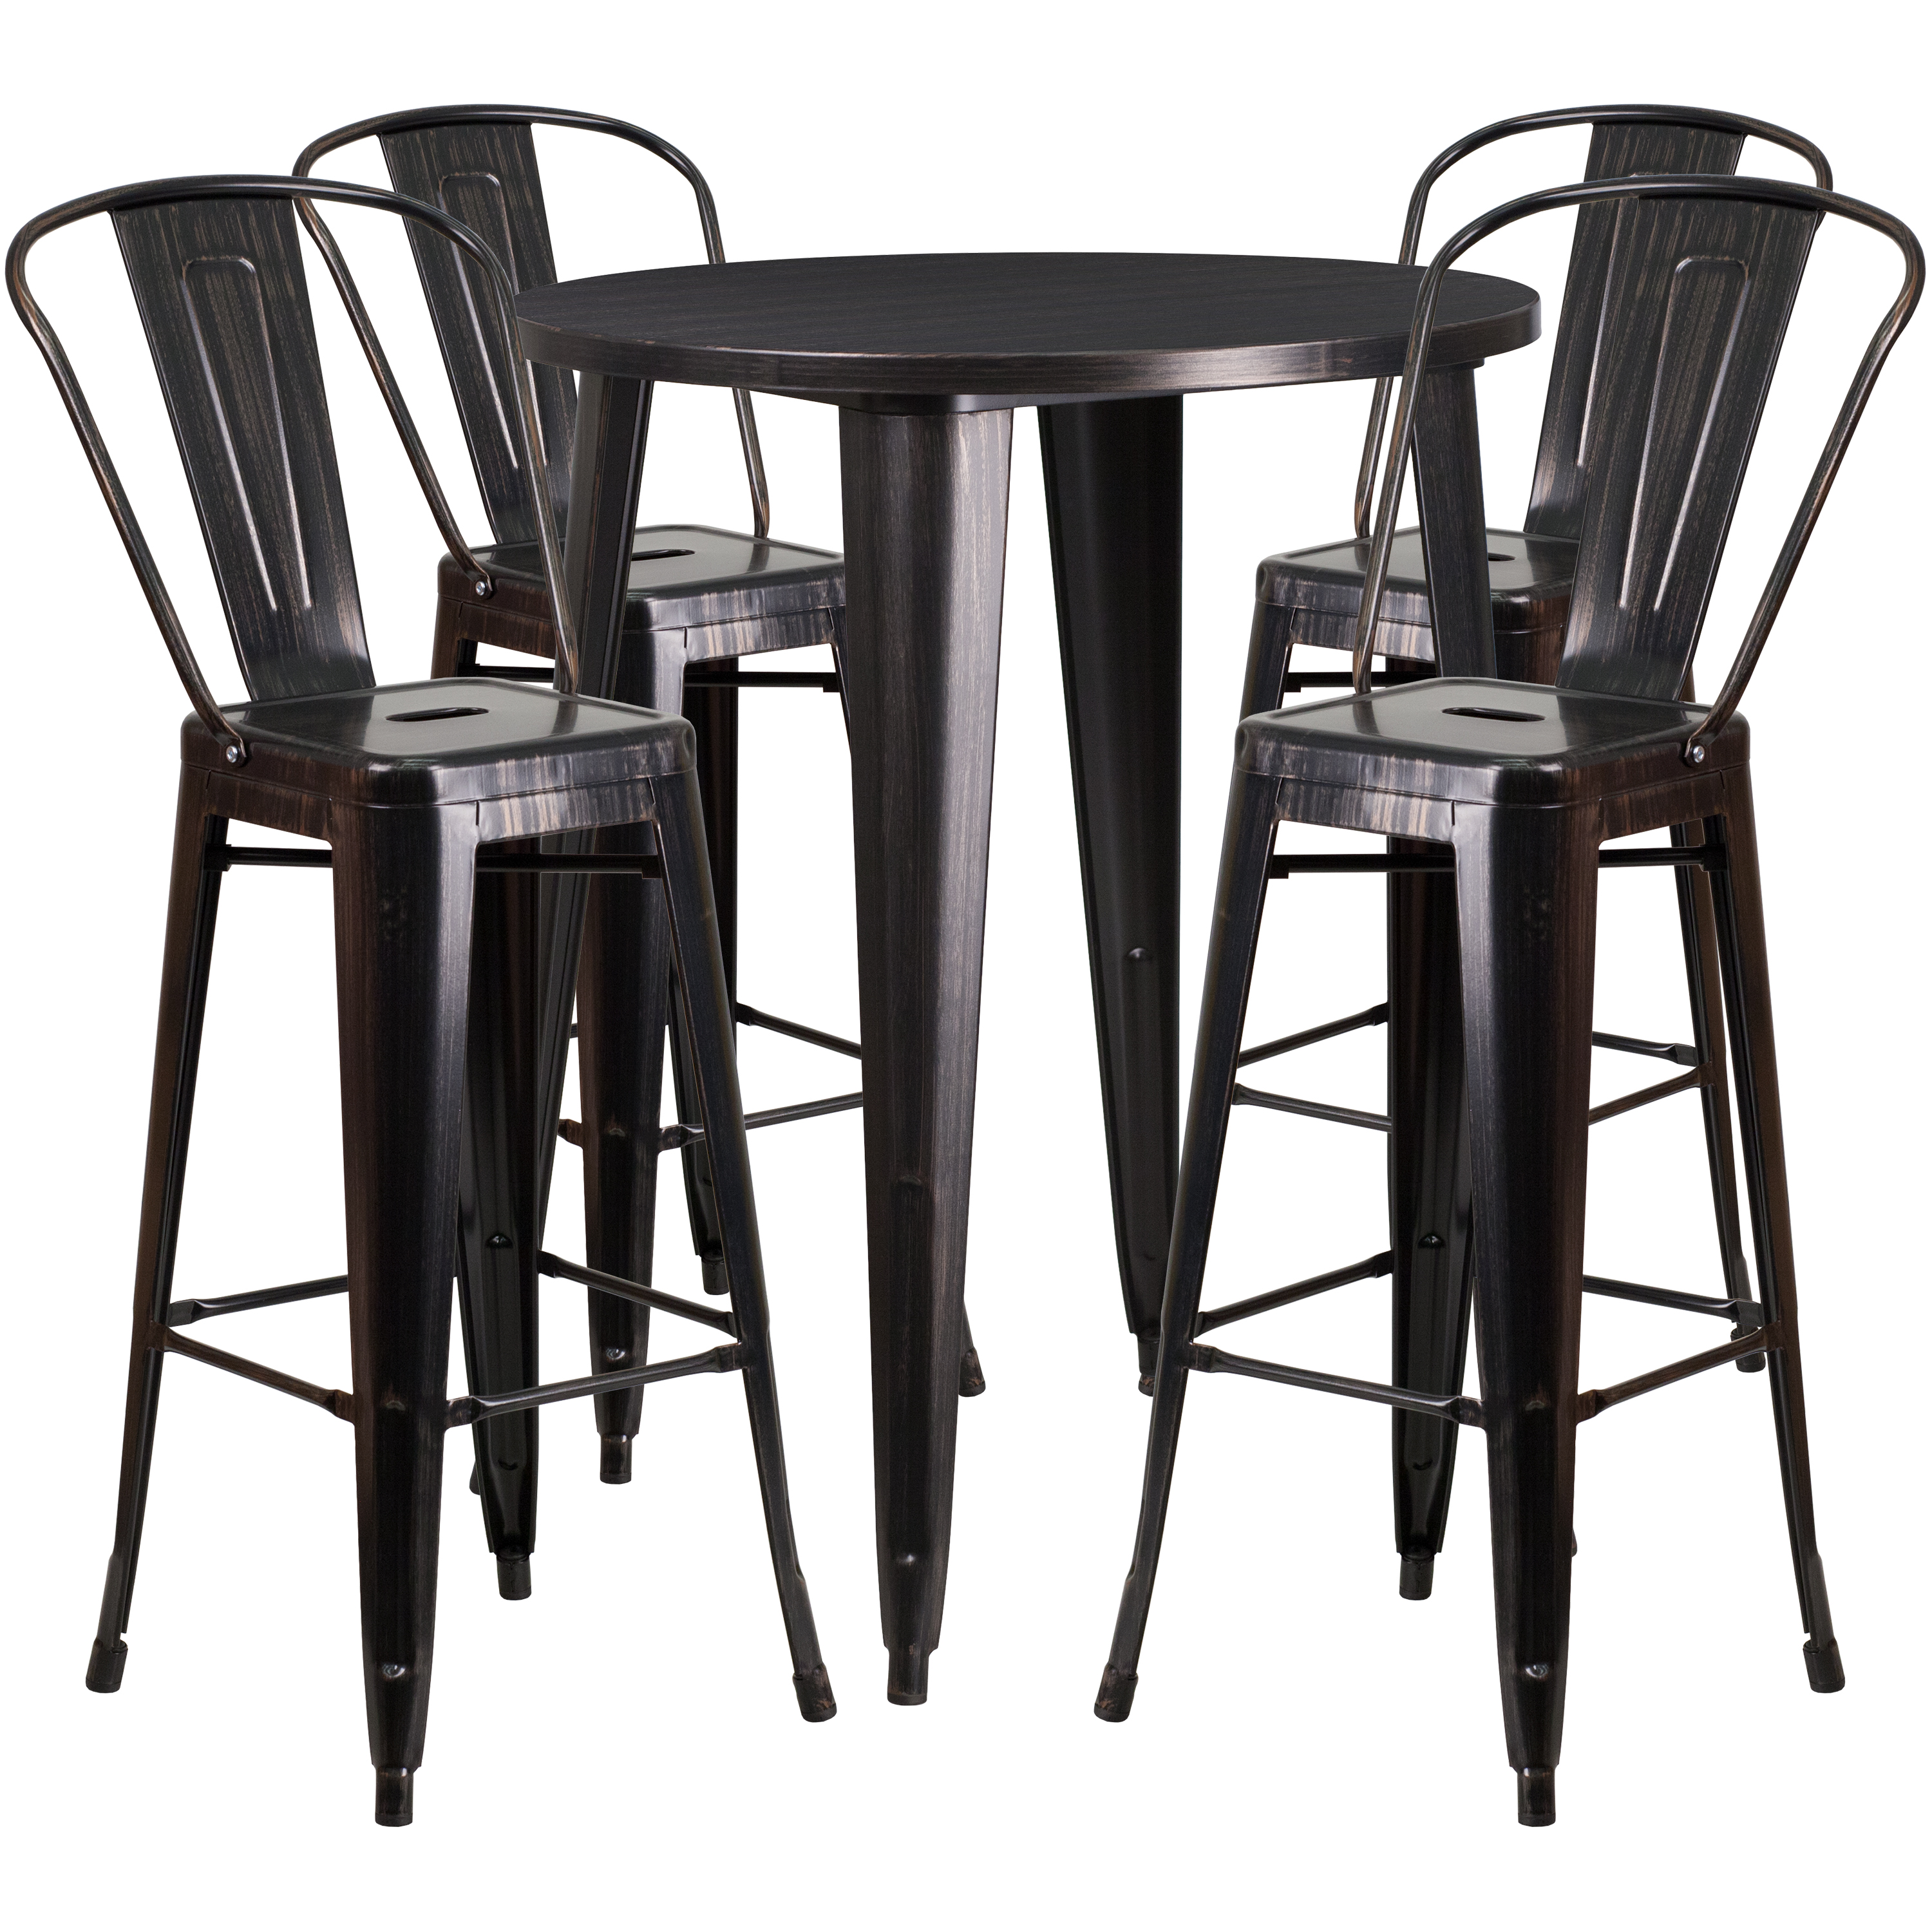 Flash Furniture Commercial Grade 30" Round Black-Antique Gold Metal Indoor-Outdoor Bar Table Set with 4 Cafe Stools - image 2 of 5